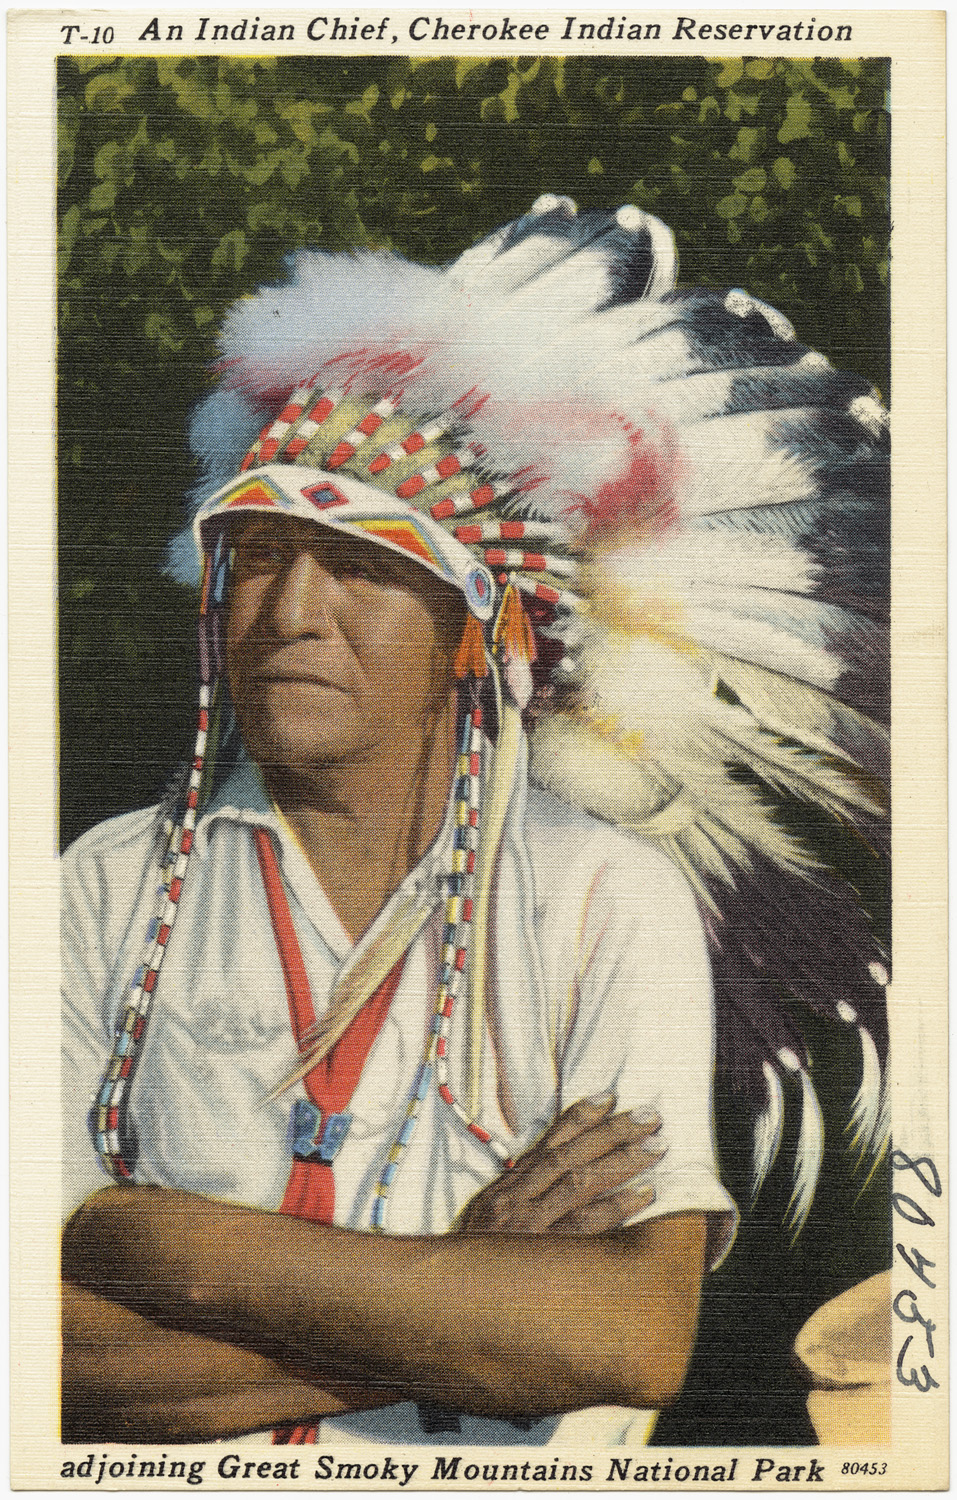 a man wearing an indian headdress sitting down with his arms crossed